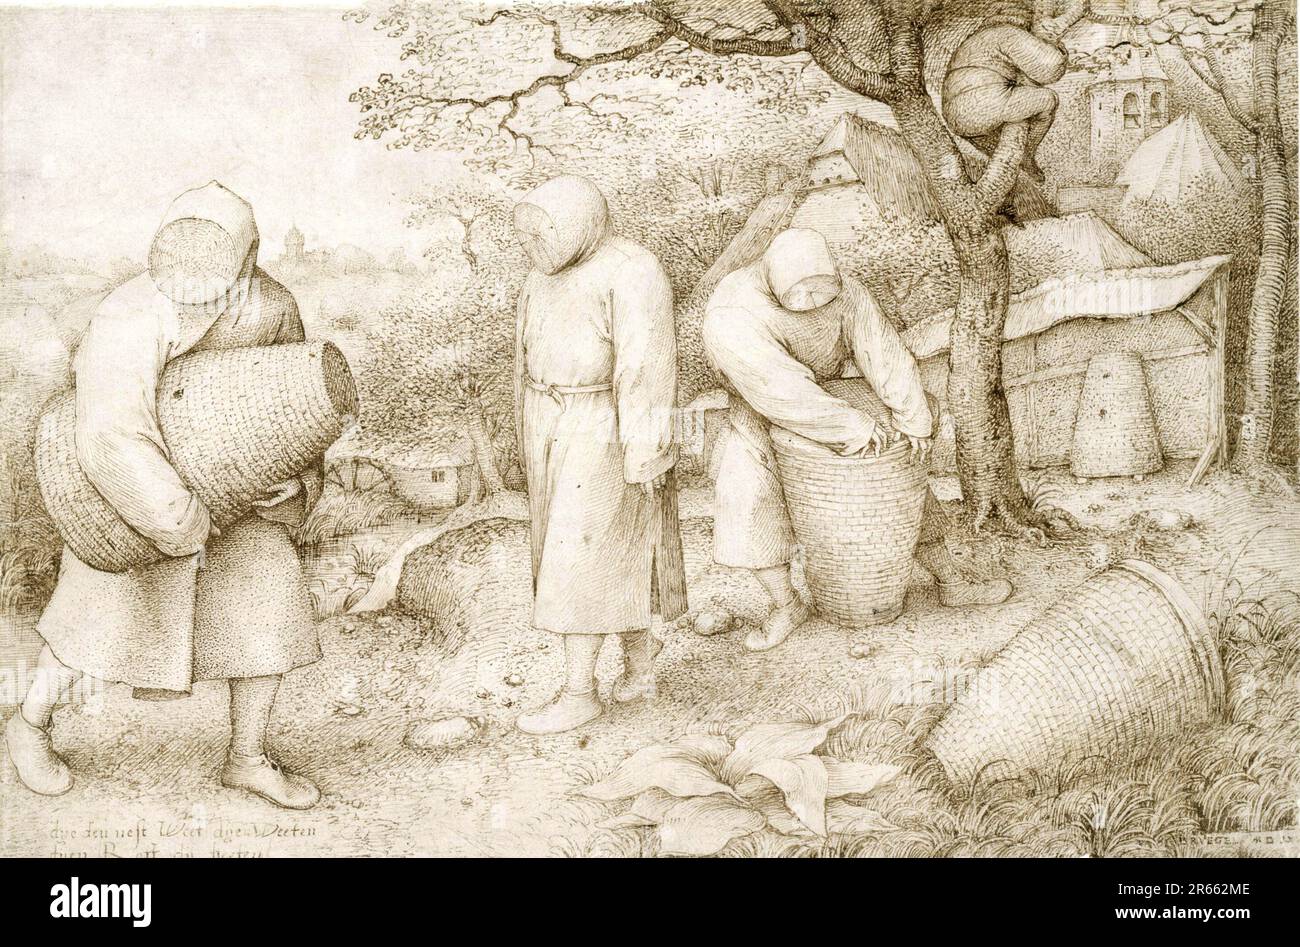 Beekeepers sketched by the Dutch Renaissance painter Pieter Breughel the Elder in 1568. Breughel was the most important painter of the Dutch and Flemish Renaissance. His choice of subjects was influential, he rejected portraits and religious scenes in favour of local and peasant scenes. Stock Photo